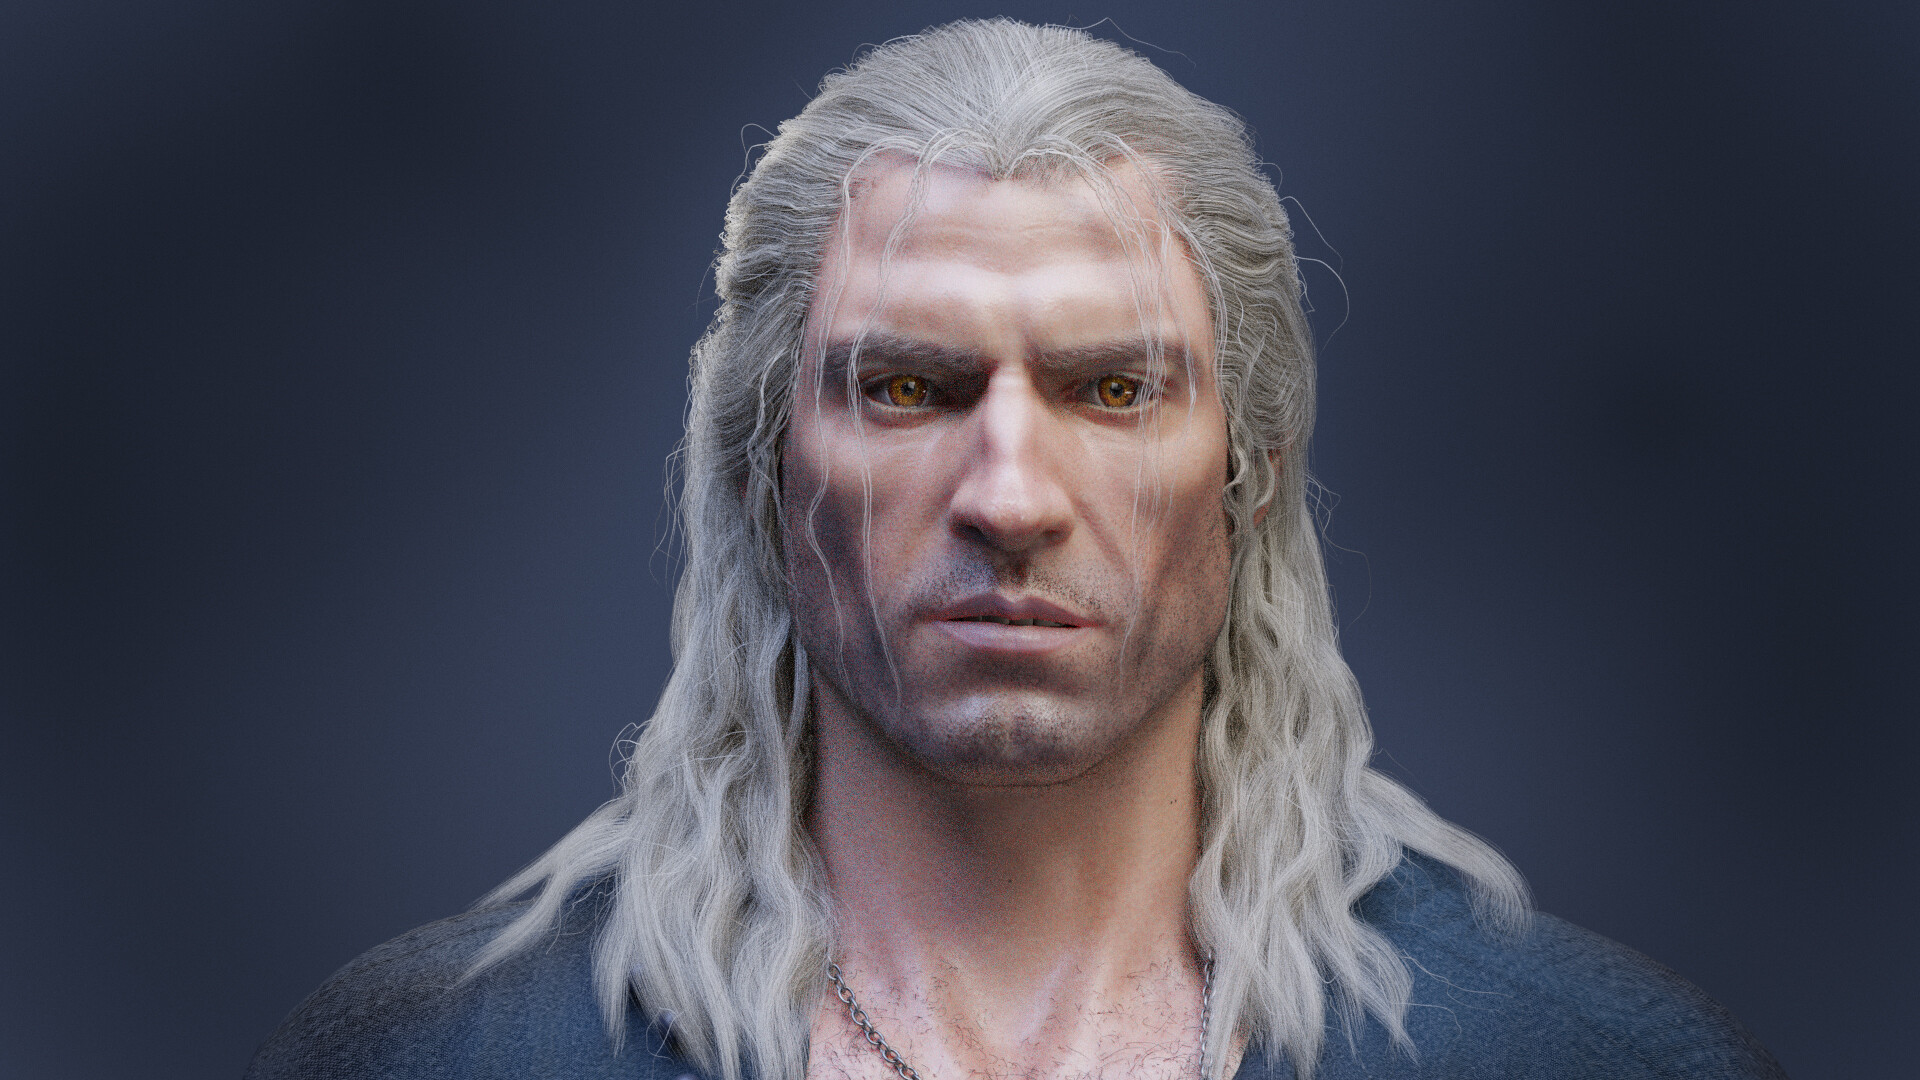 ArtStation - The Witcher - Realistic Character 100% Blender